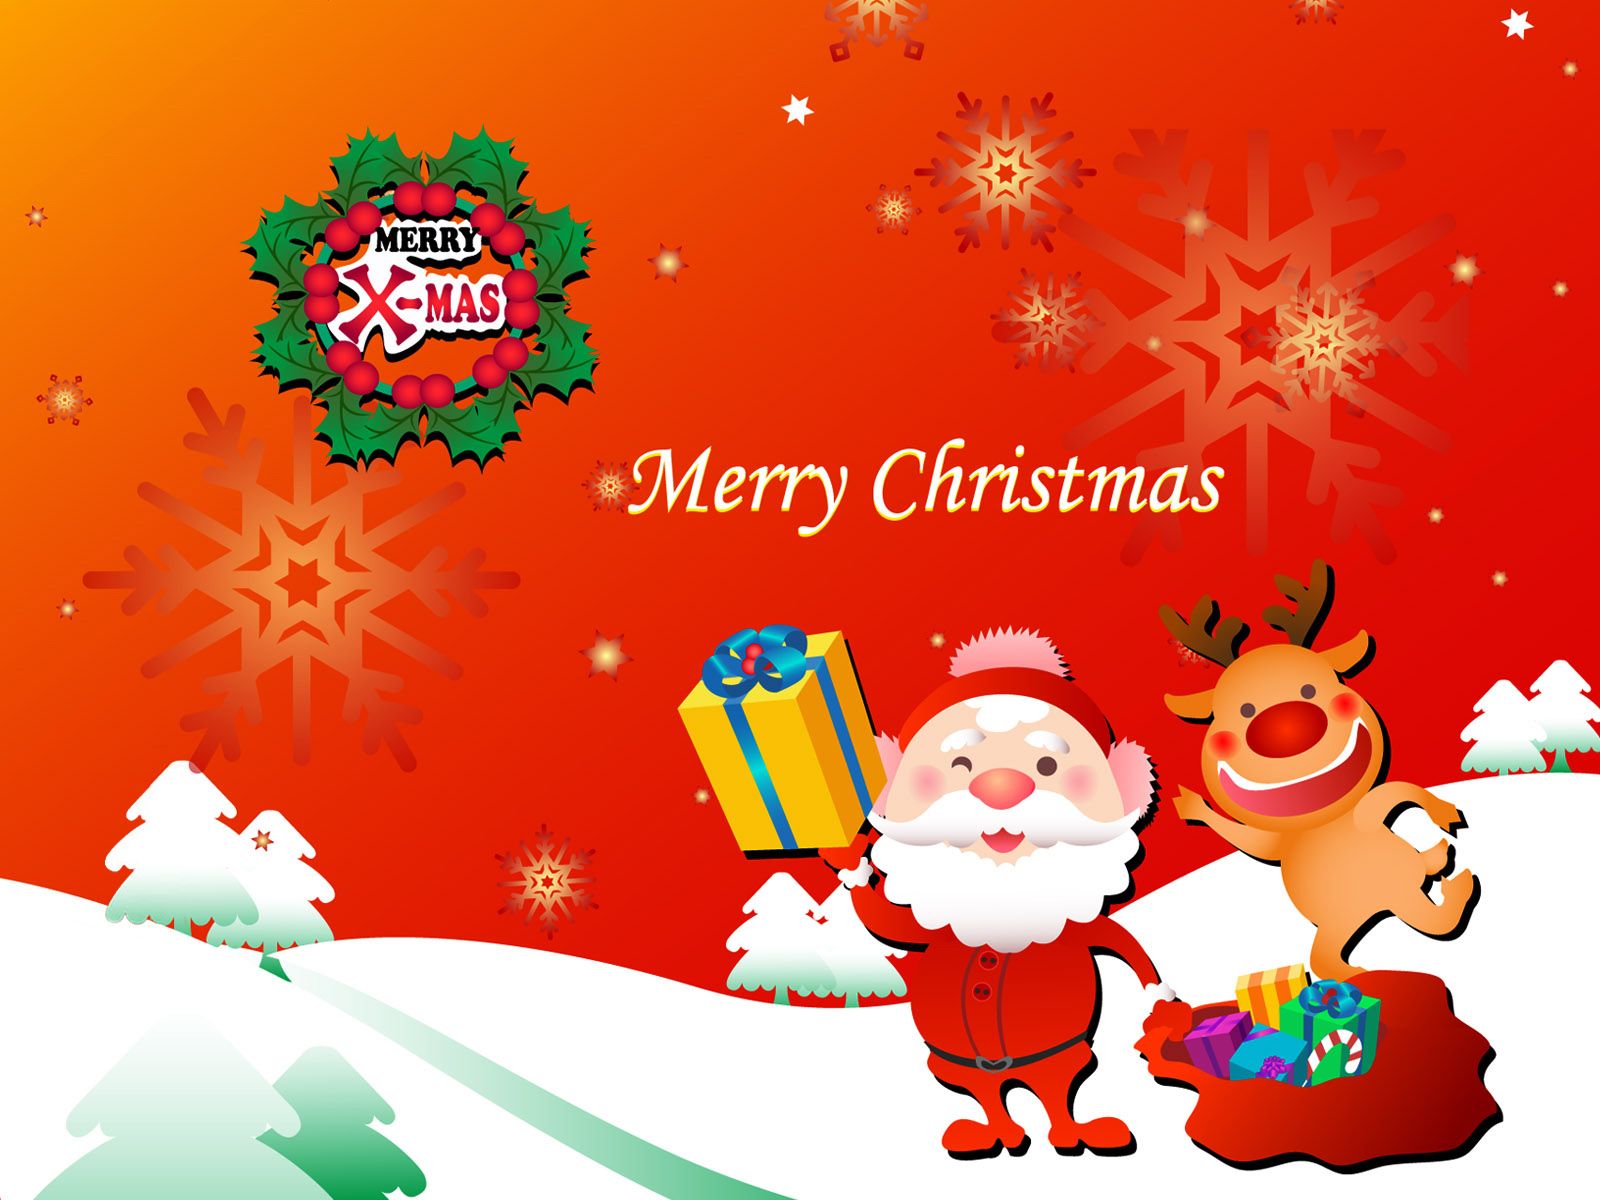 Wishes You All A Merry Christmas With Santaclaus Wallpaper